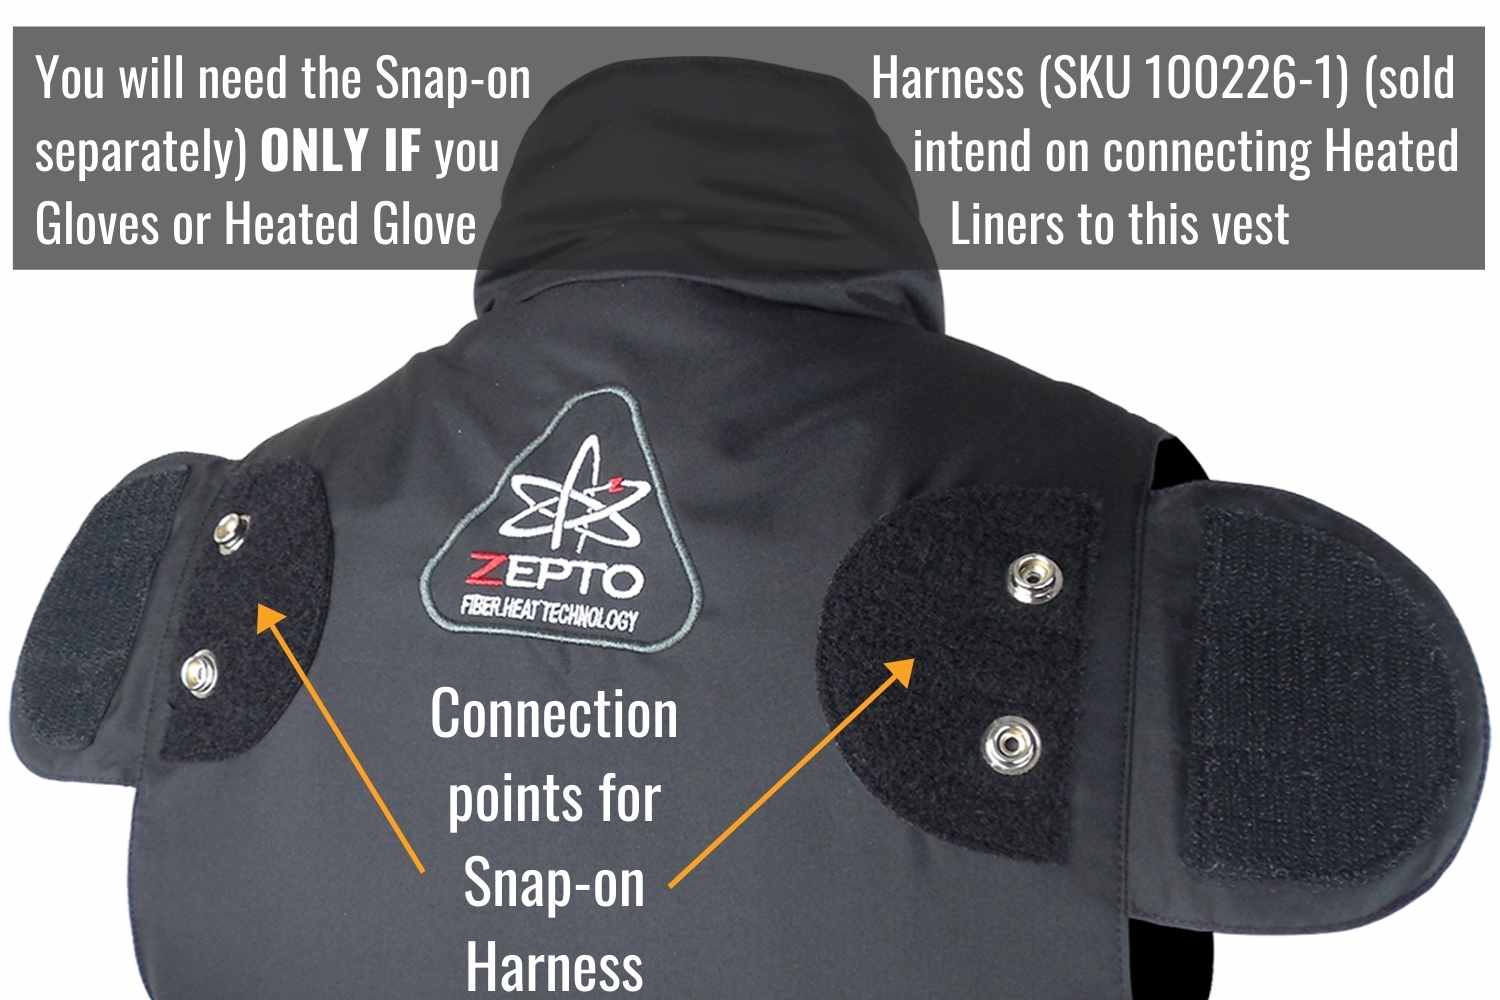 Additional options with vest liner